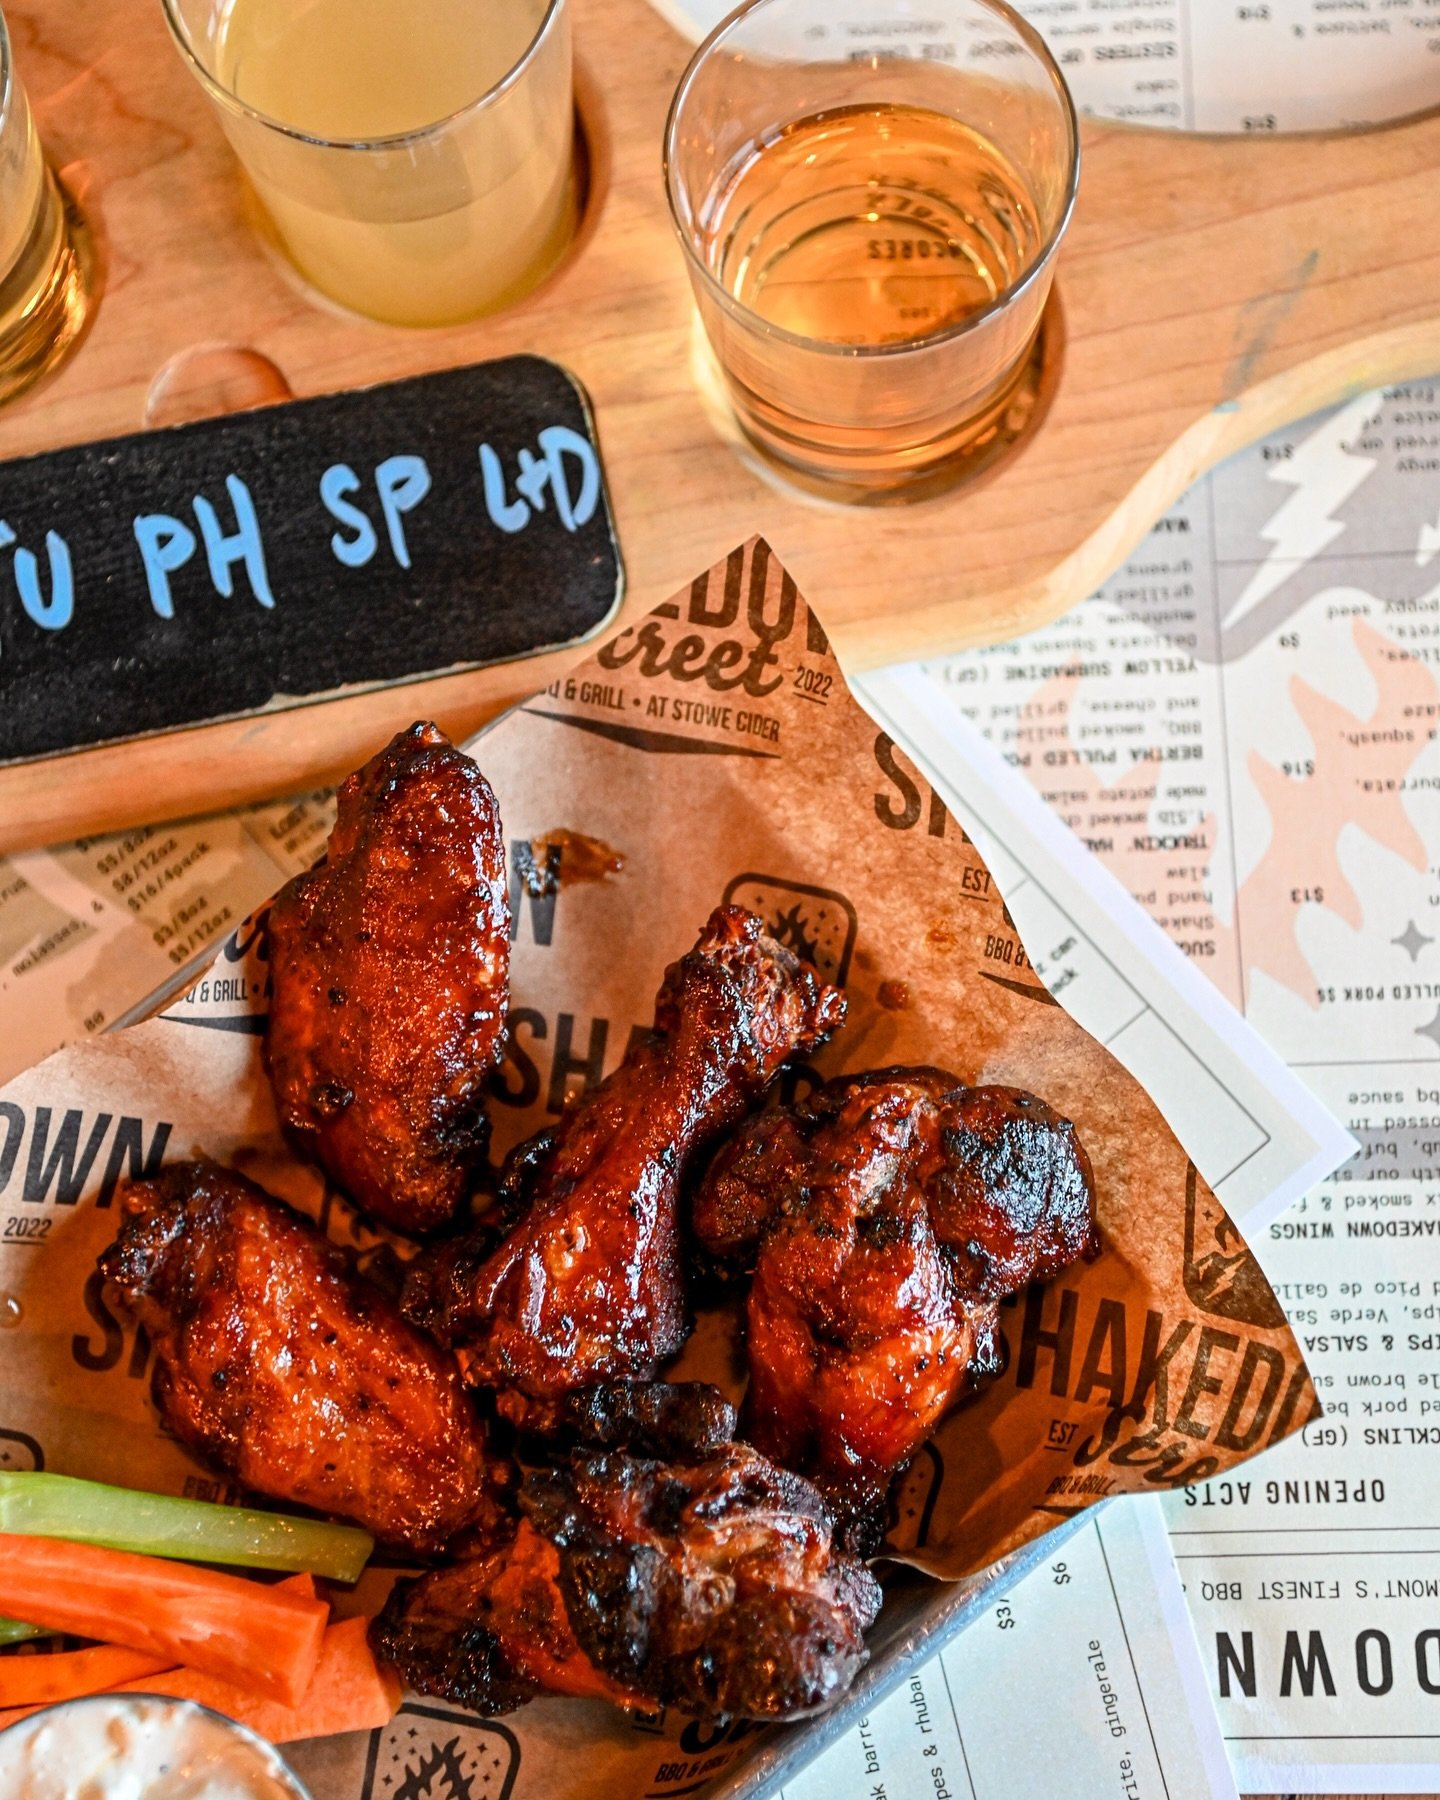 Come on in for WING WEDNESDAY🔥 Our Shakedown BBQ (house OG sauce) is thick and bold with just a touch of maple sweetness. Share, only if you dare!

What&rsquo;s the deal? We offer 10 for $10 Wings and $5 High &amp; Dry drafts every Wednesday!

This 